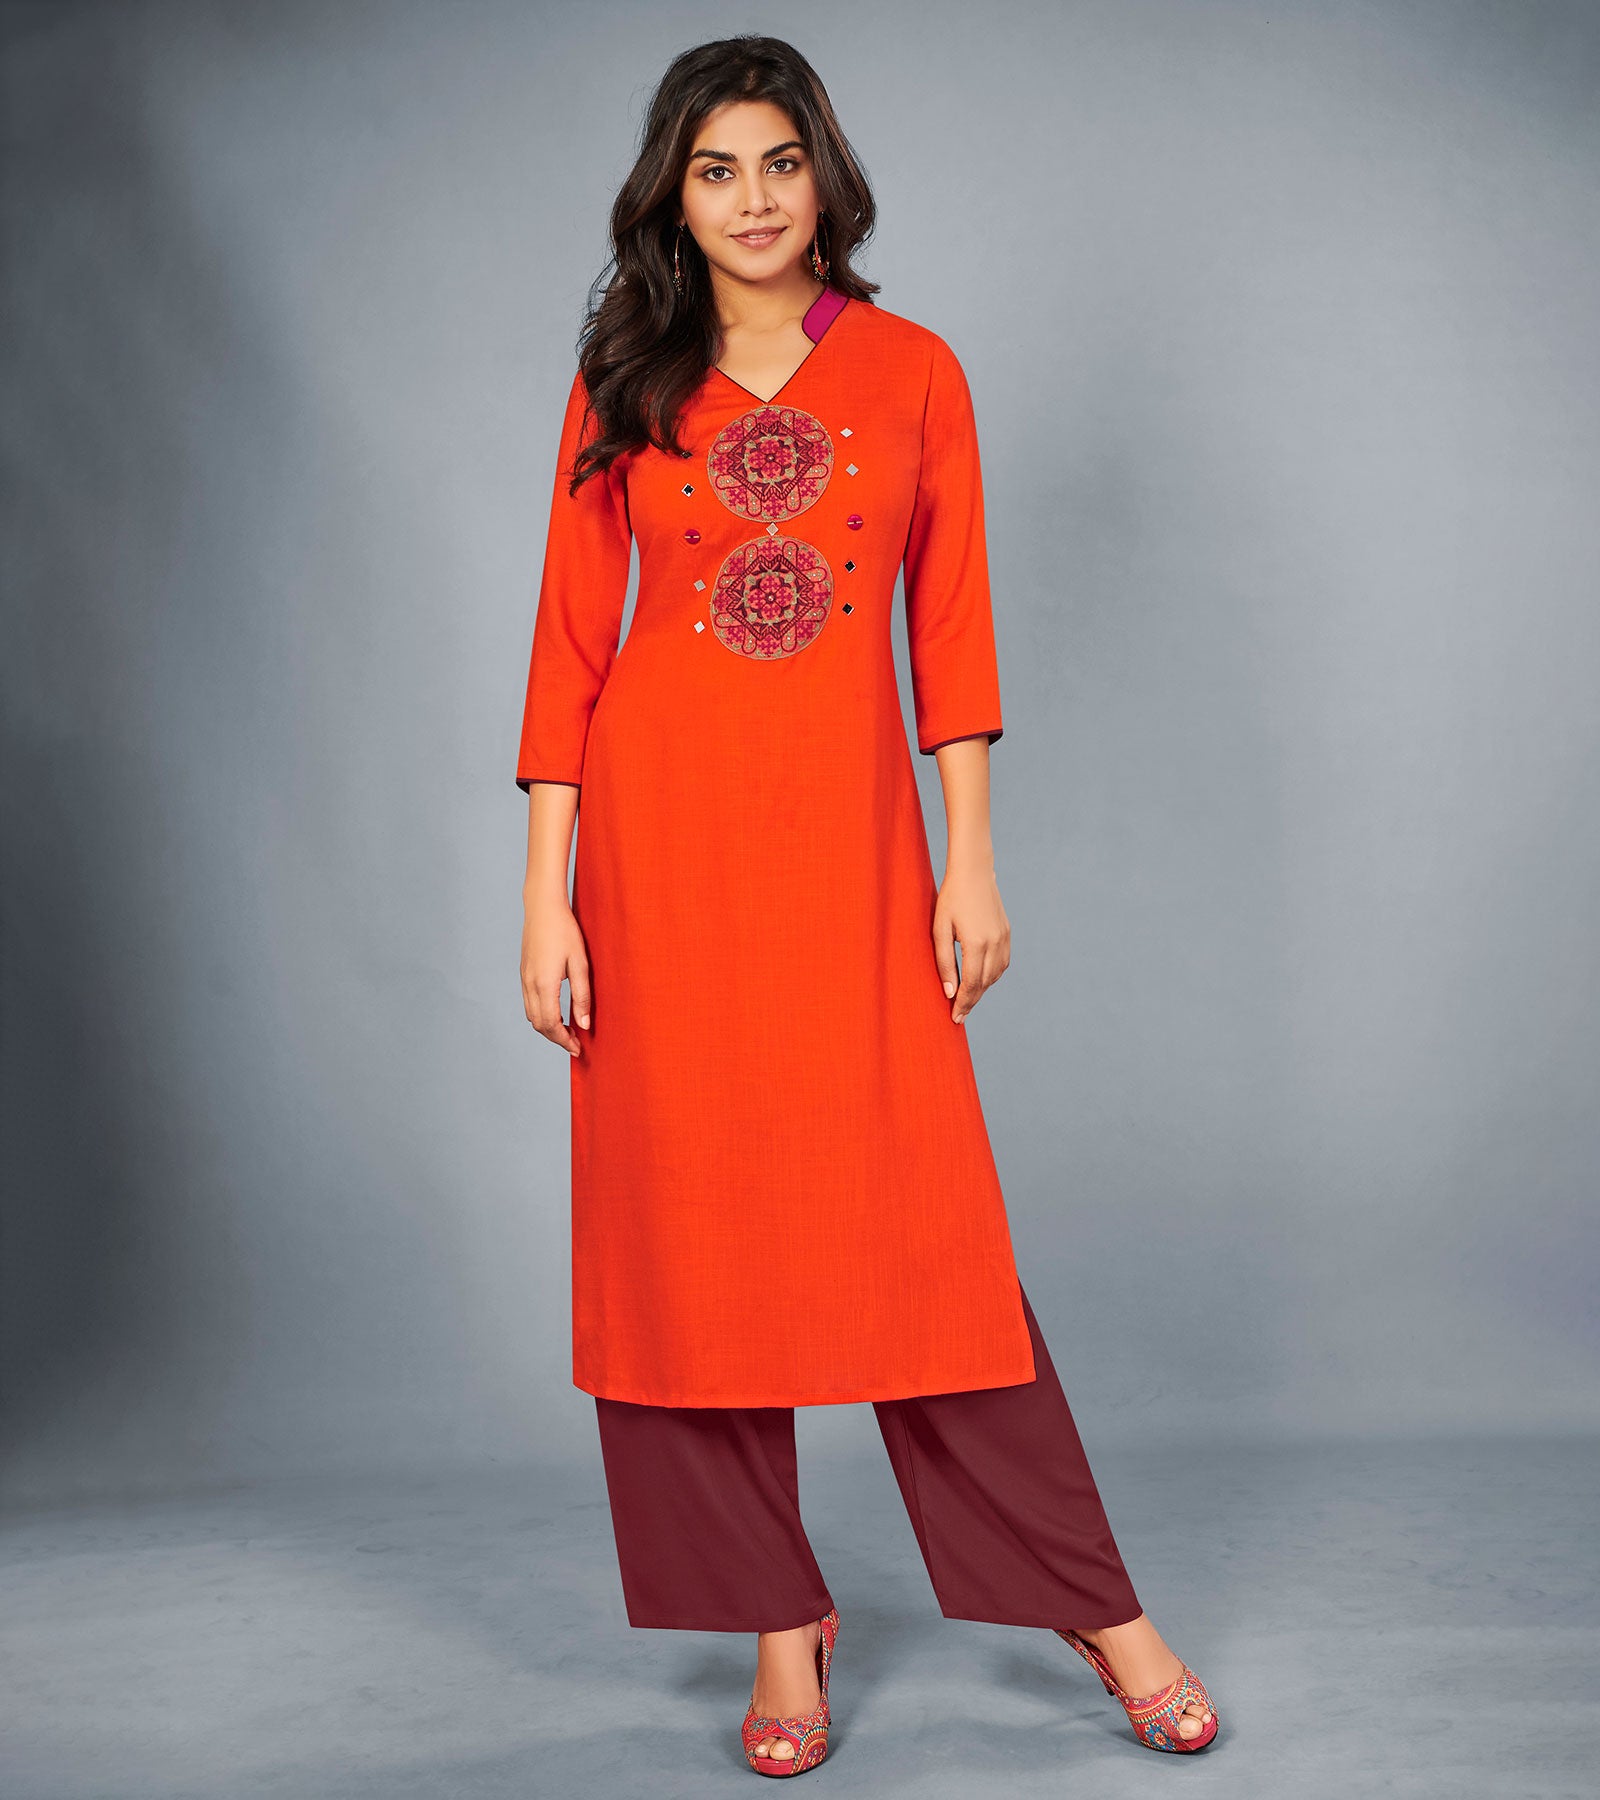 Rust Colour Cotton Kurti With Beautiful Aari Embroidery Gives